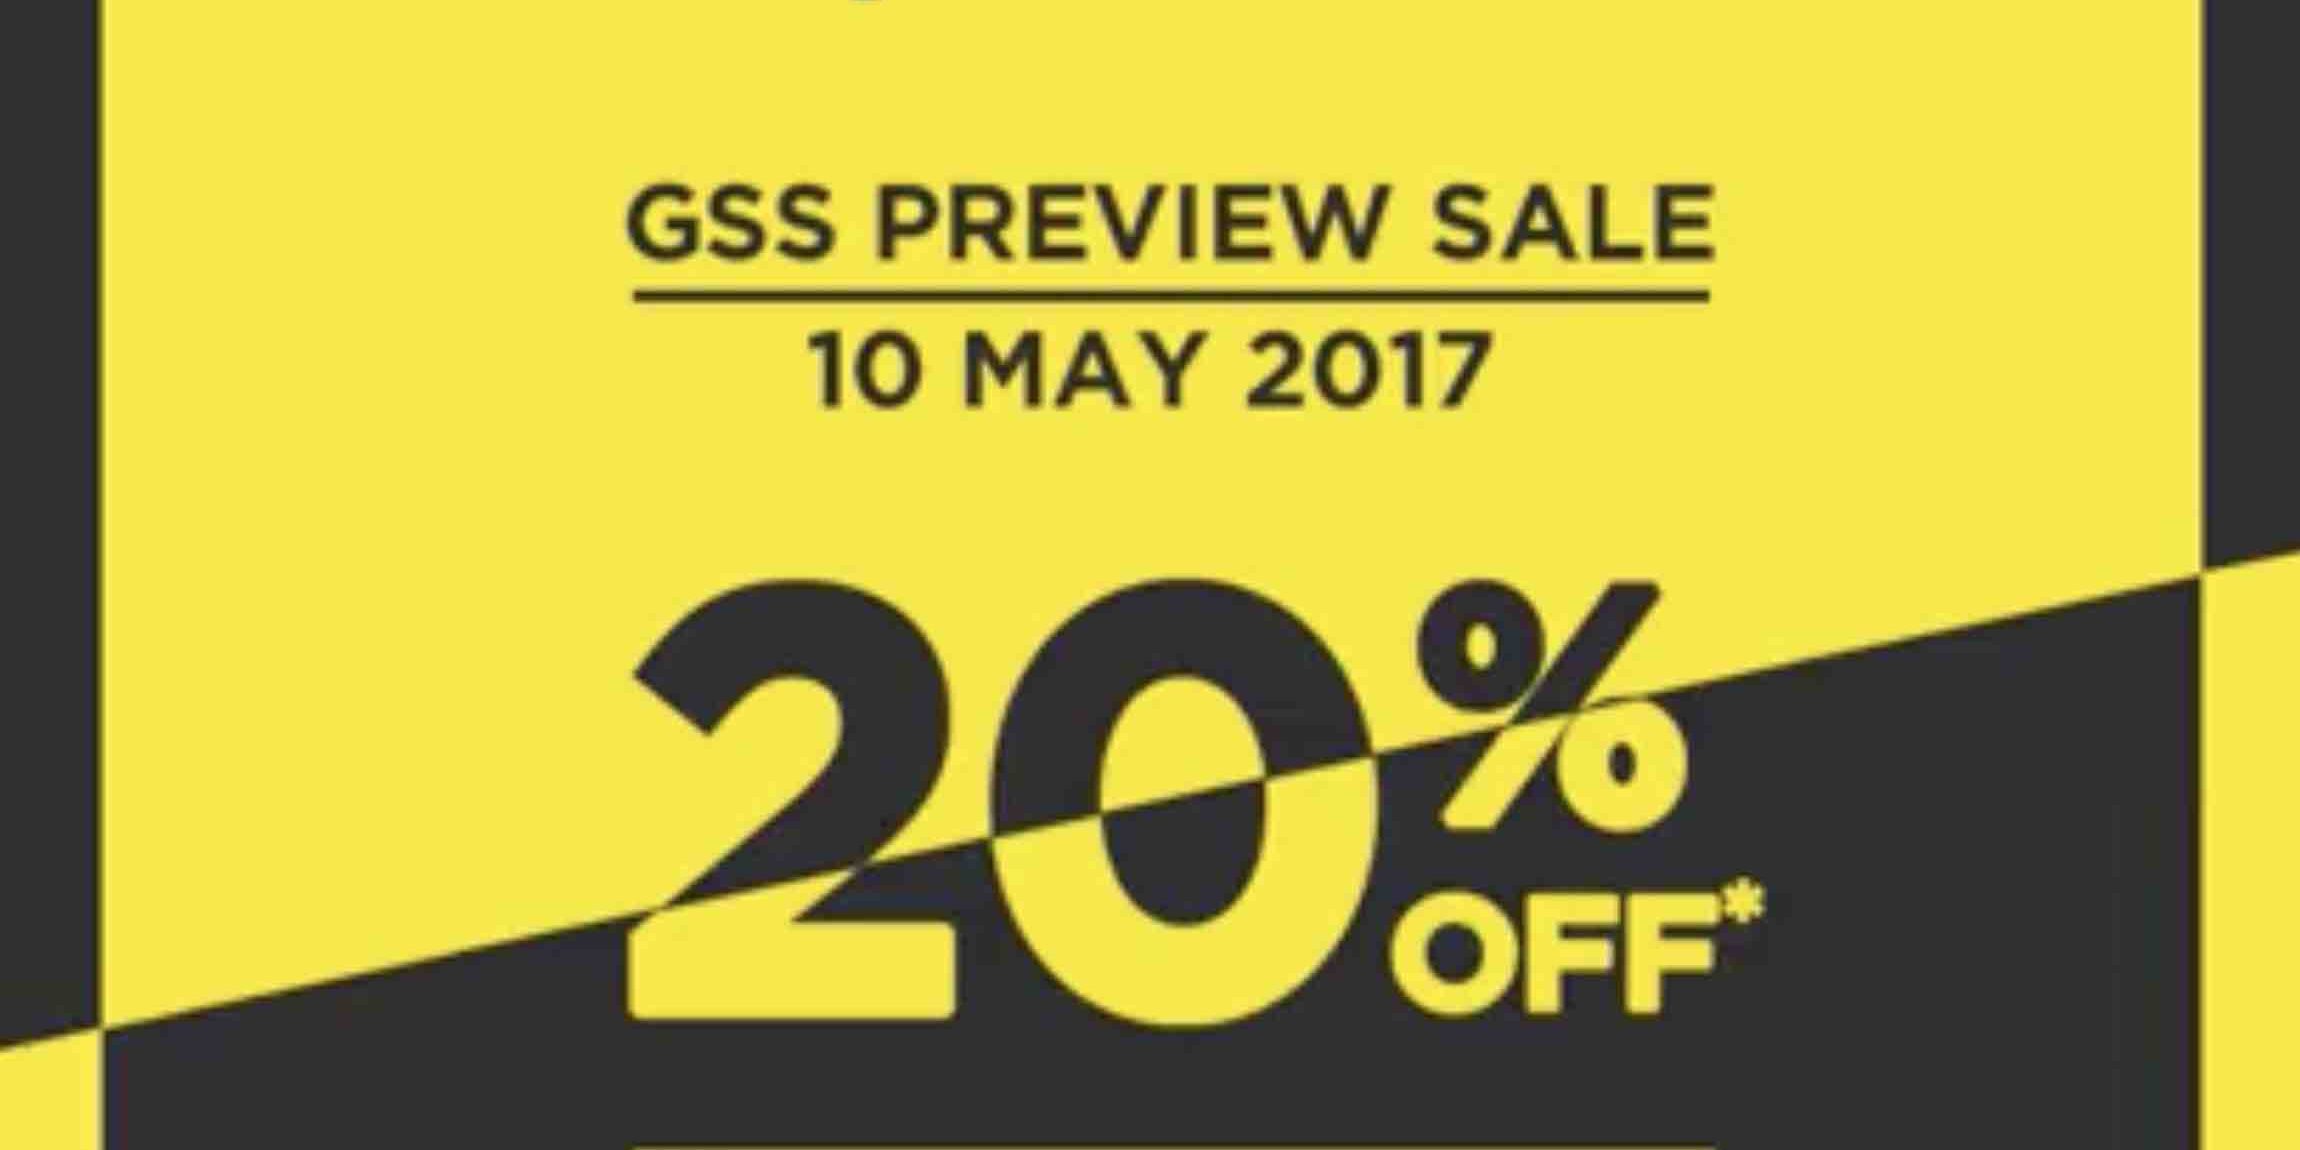 BoConcept Singapore GSS Preview Sale Up to 20% Off Promotion 10 May 2017